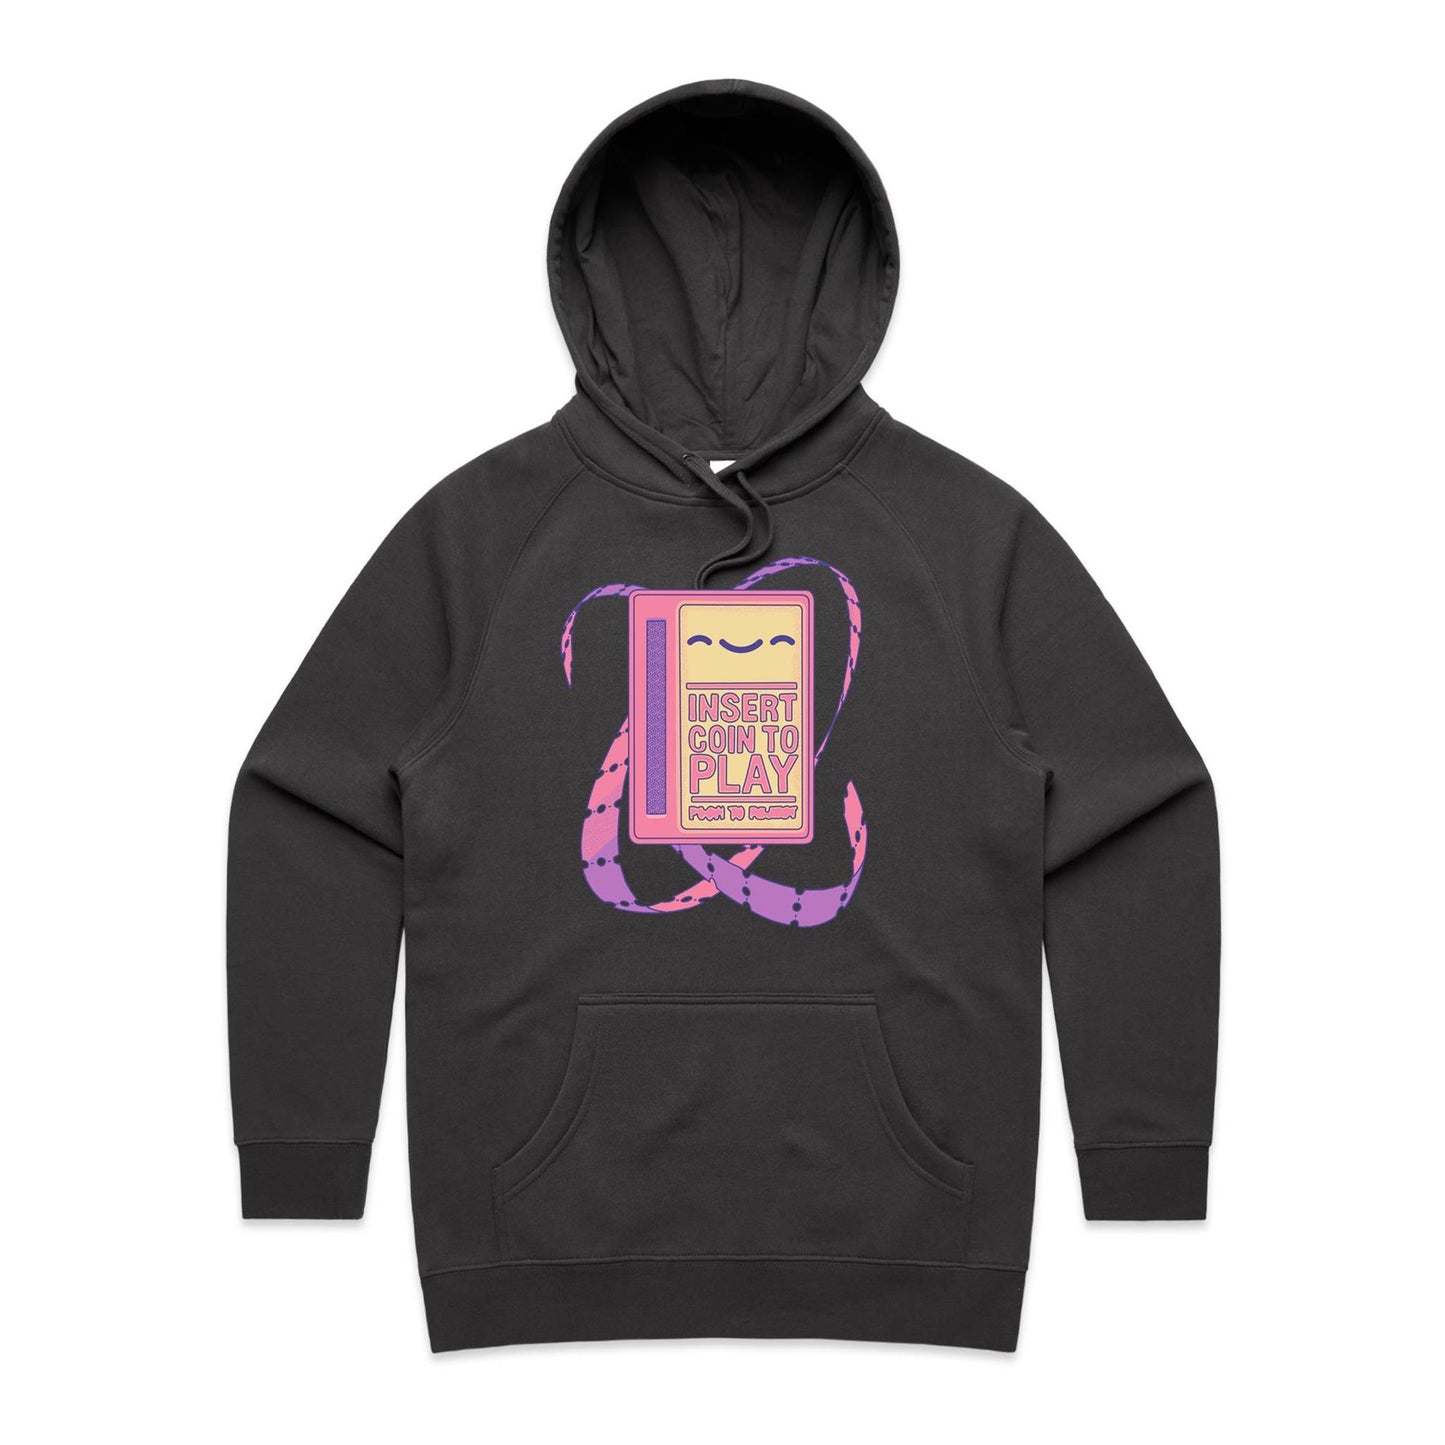 A Rose by Any Other Game - Women's Hoodie